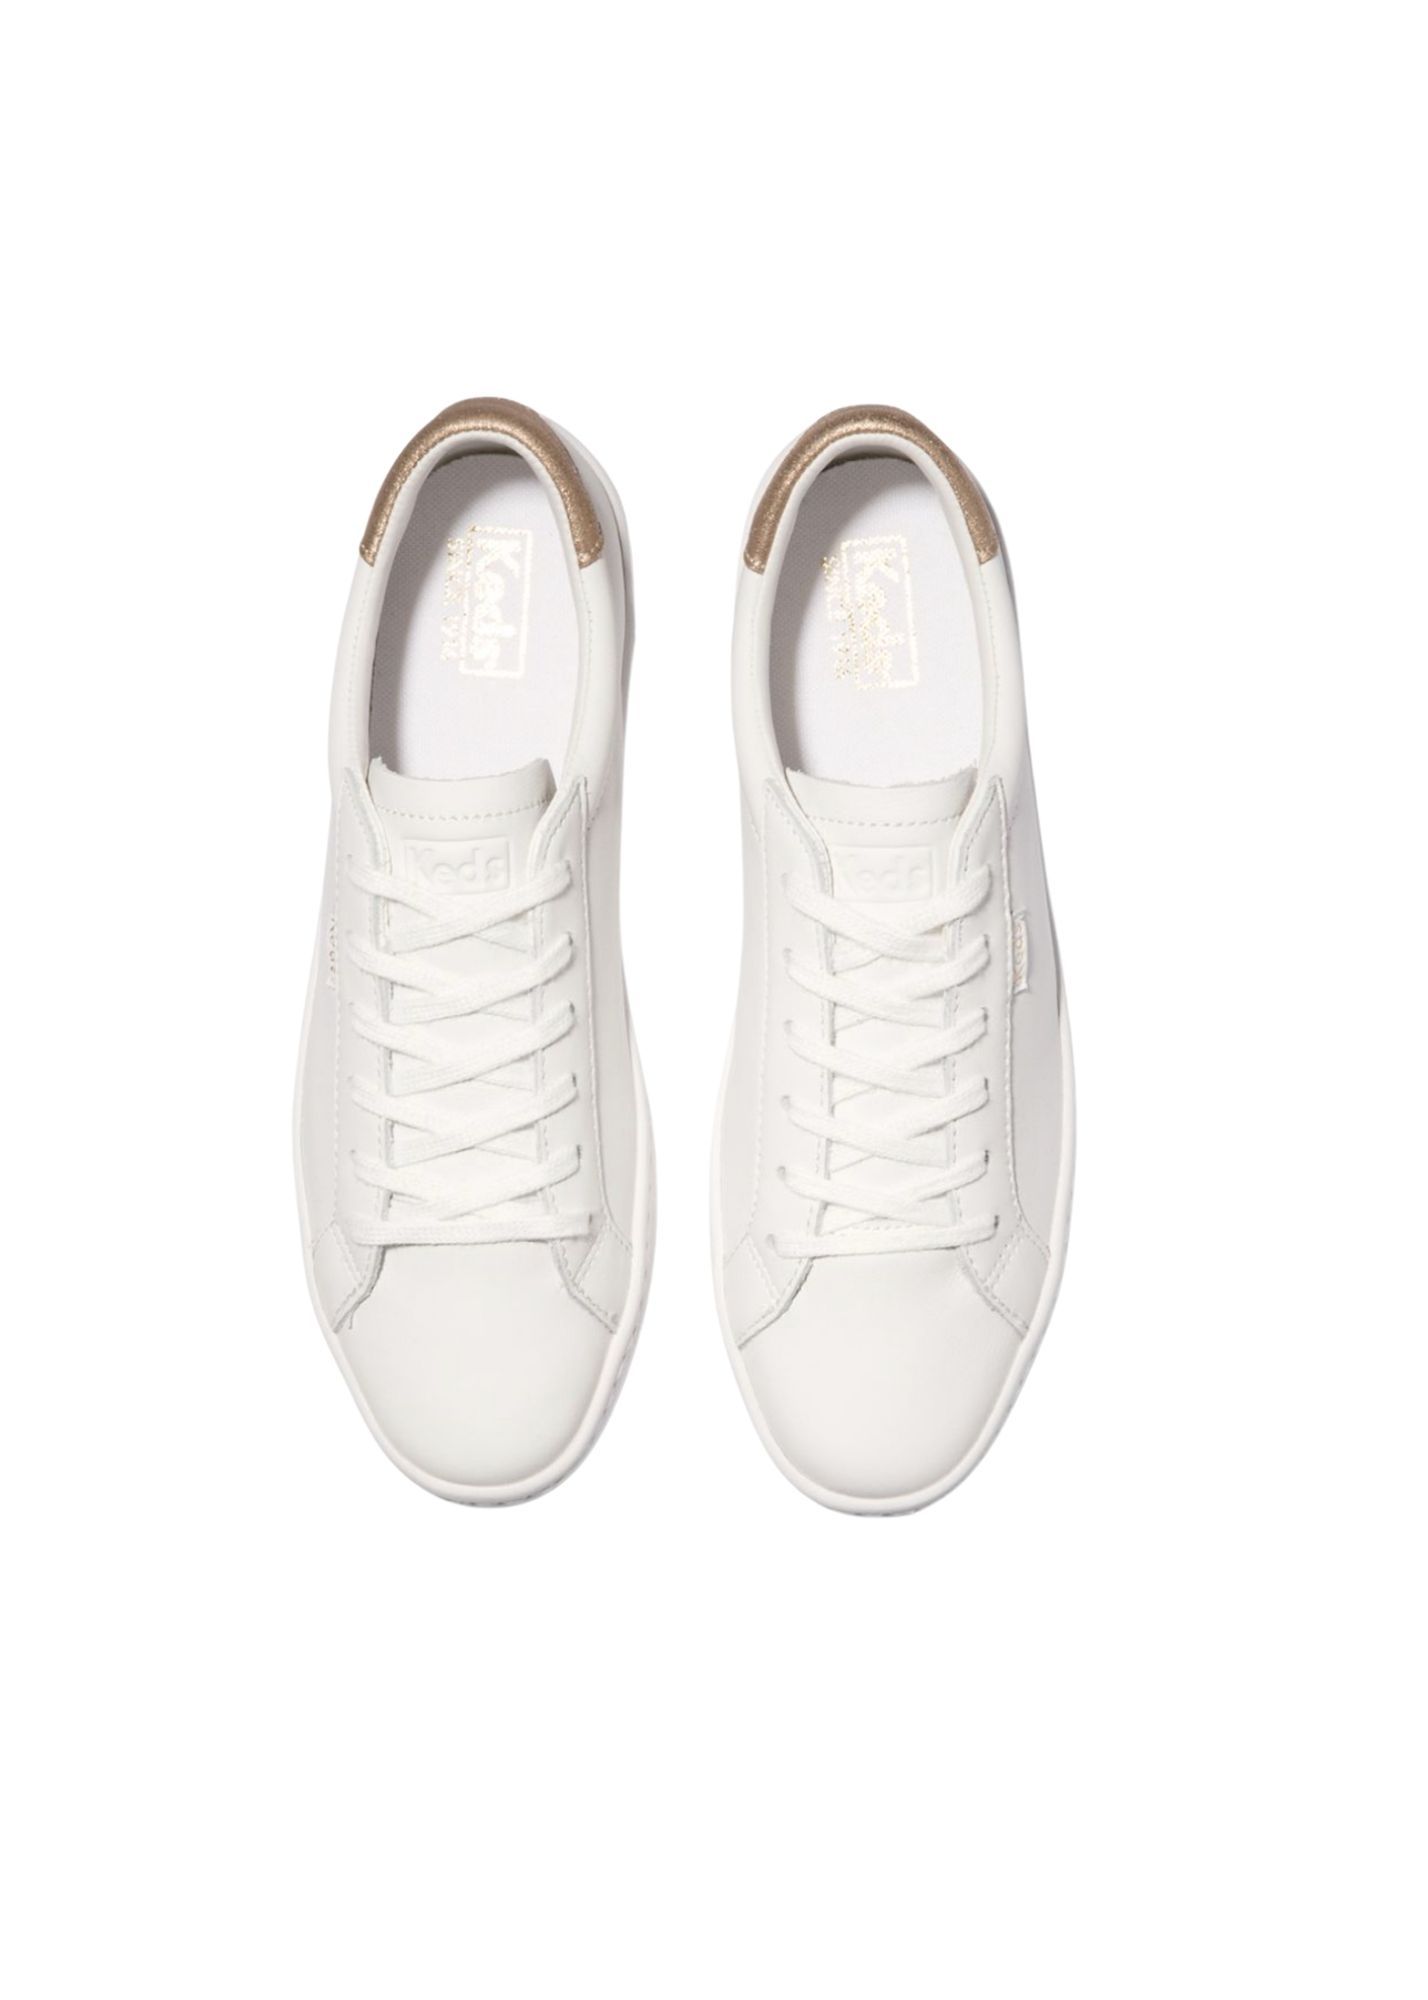 Keds White + Rose Gold Leather Sneaker Shoes Keds